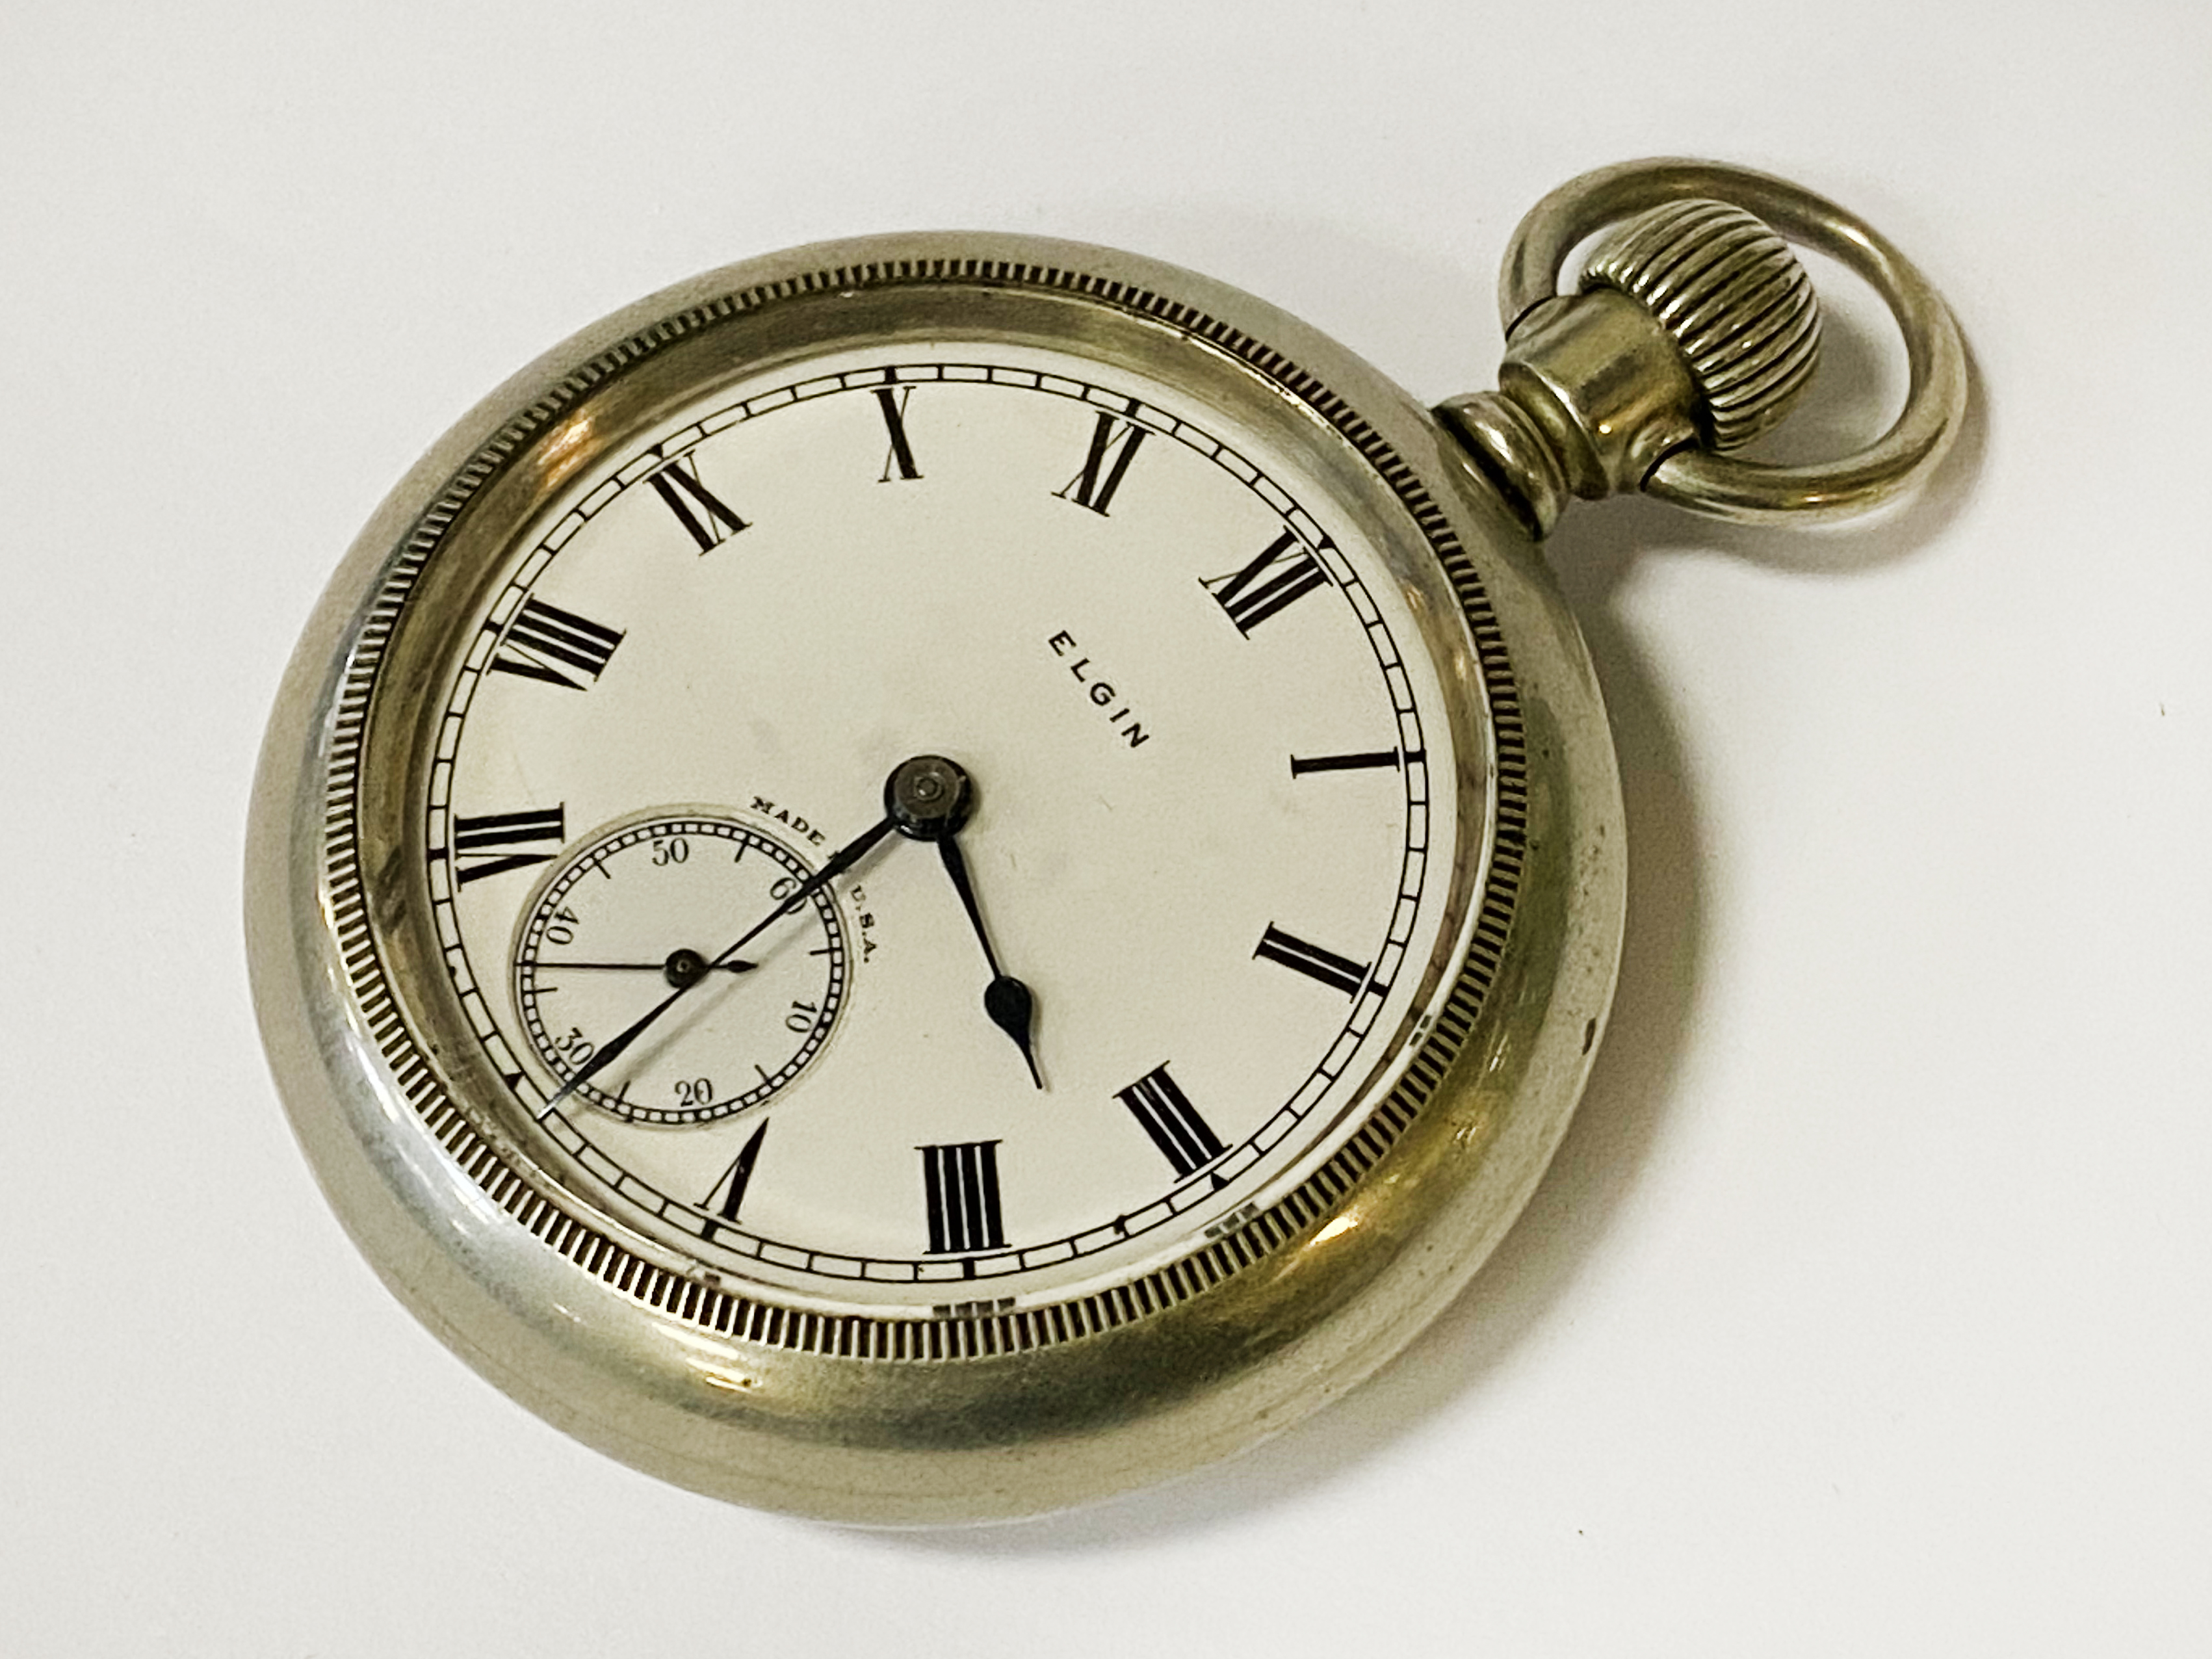 ELGIN USA POCKET WATCH - 46 MM FACE APPROX